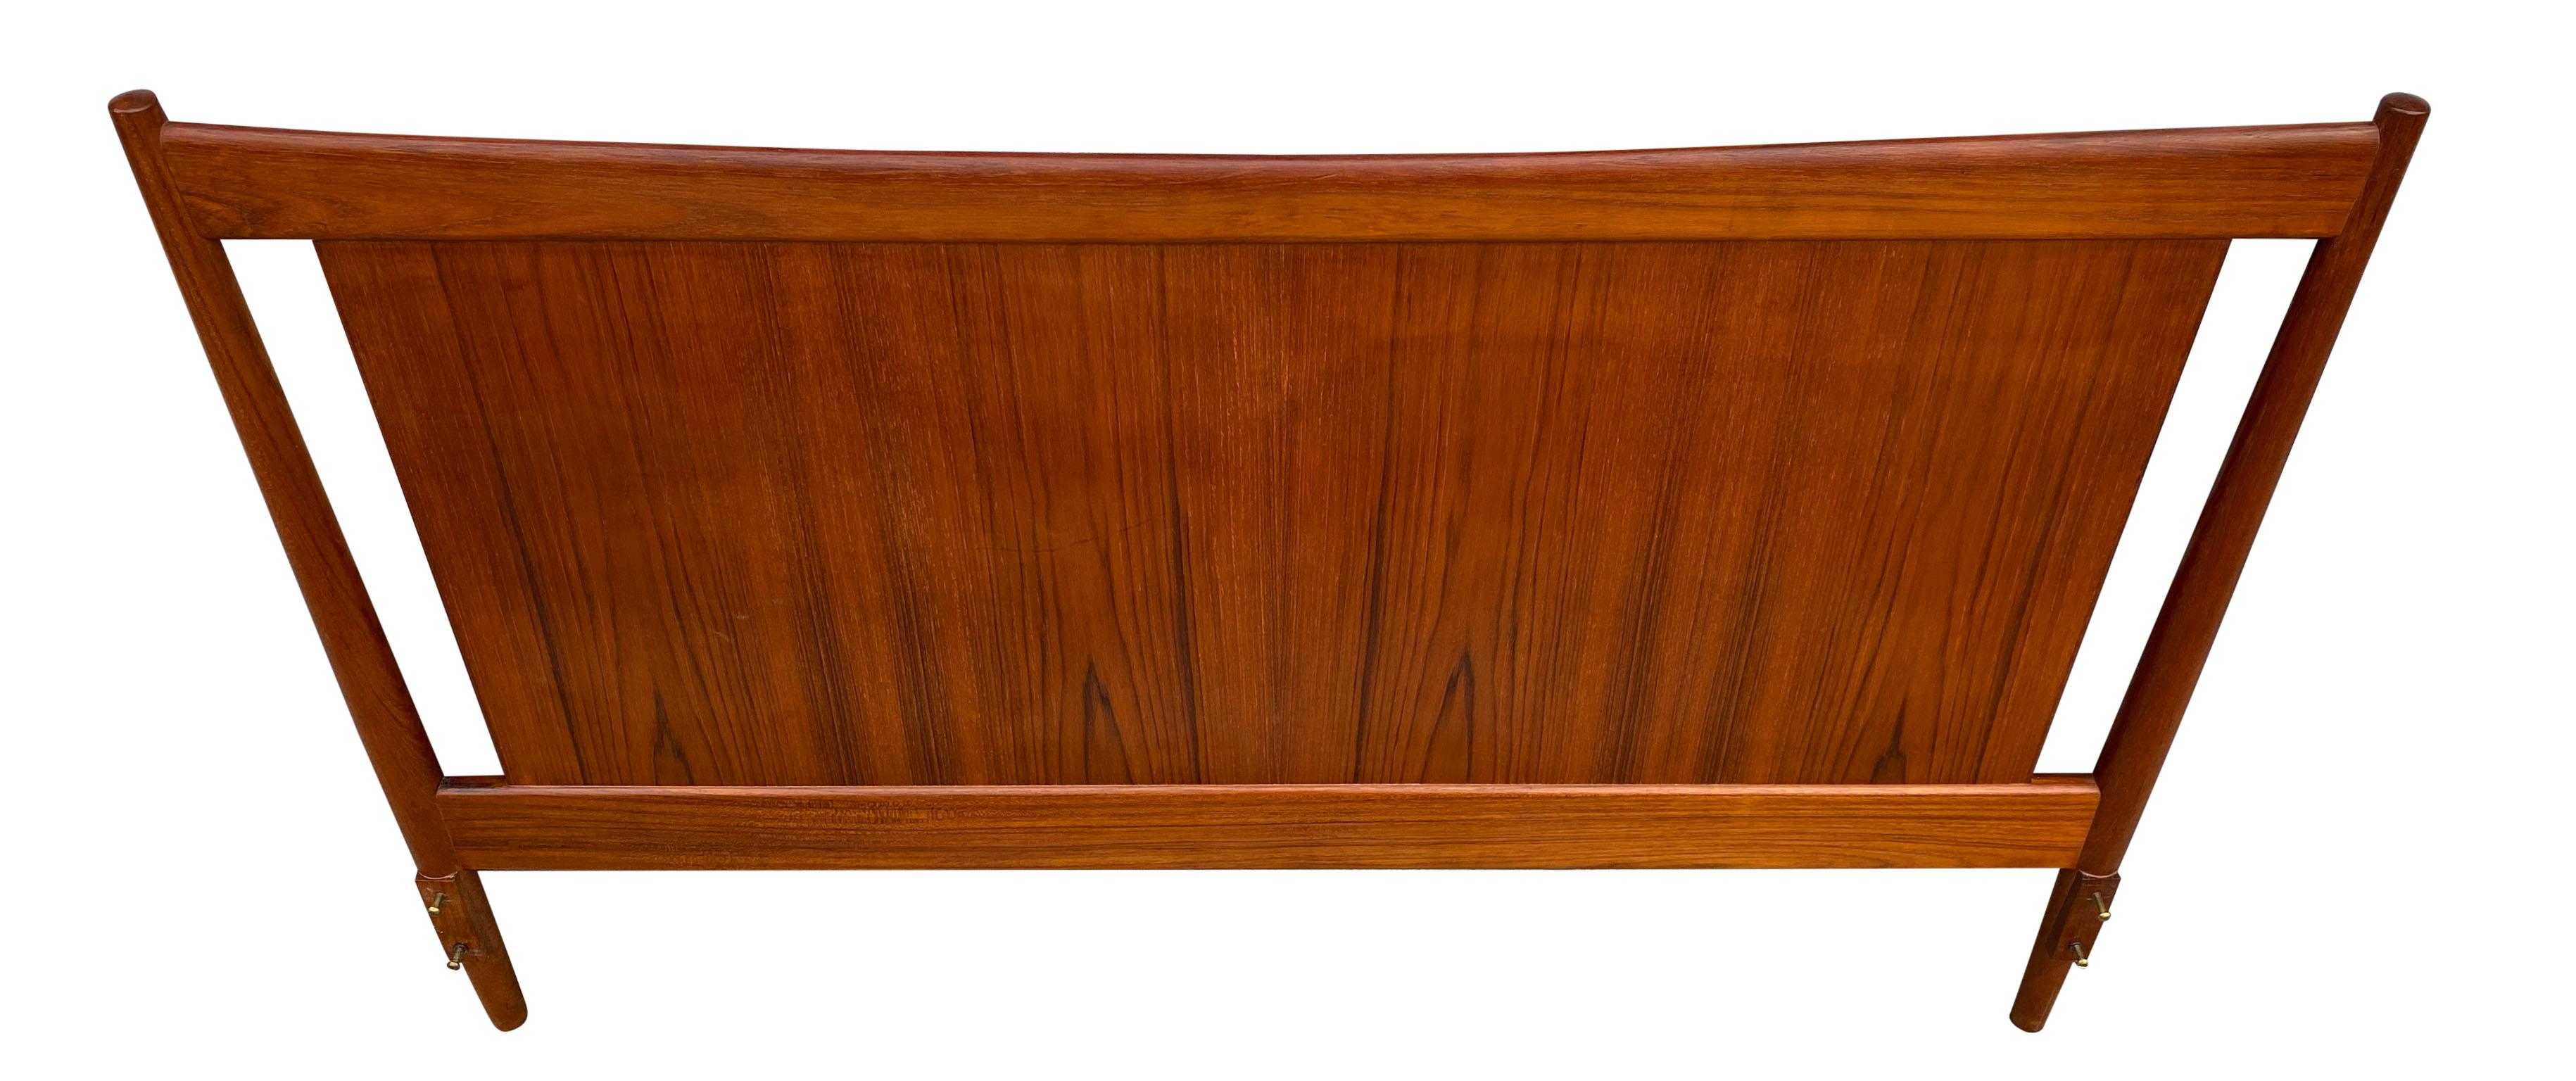 Beautiful teak Danish Mid-Century Modern full headboard made in Denmark in wonderful condition. Really nice headboard solid teak wood . Fits a full sized mattress. Bed headboard only no metal bed frame. Easily mounts to all bed frames.

Measures: